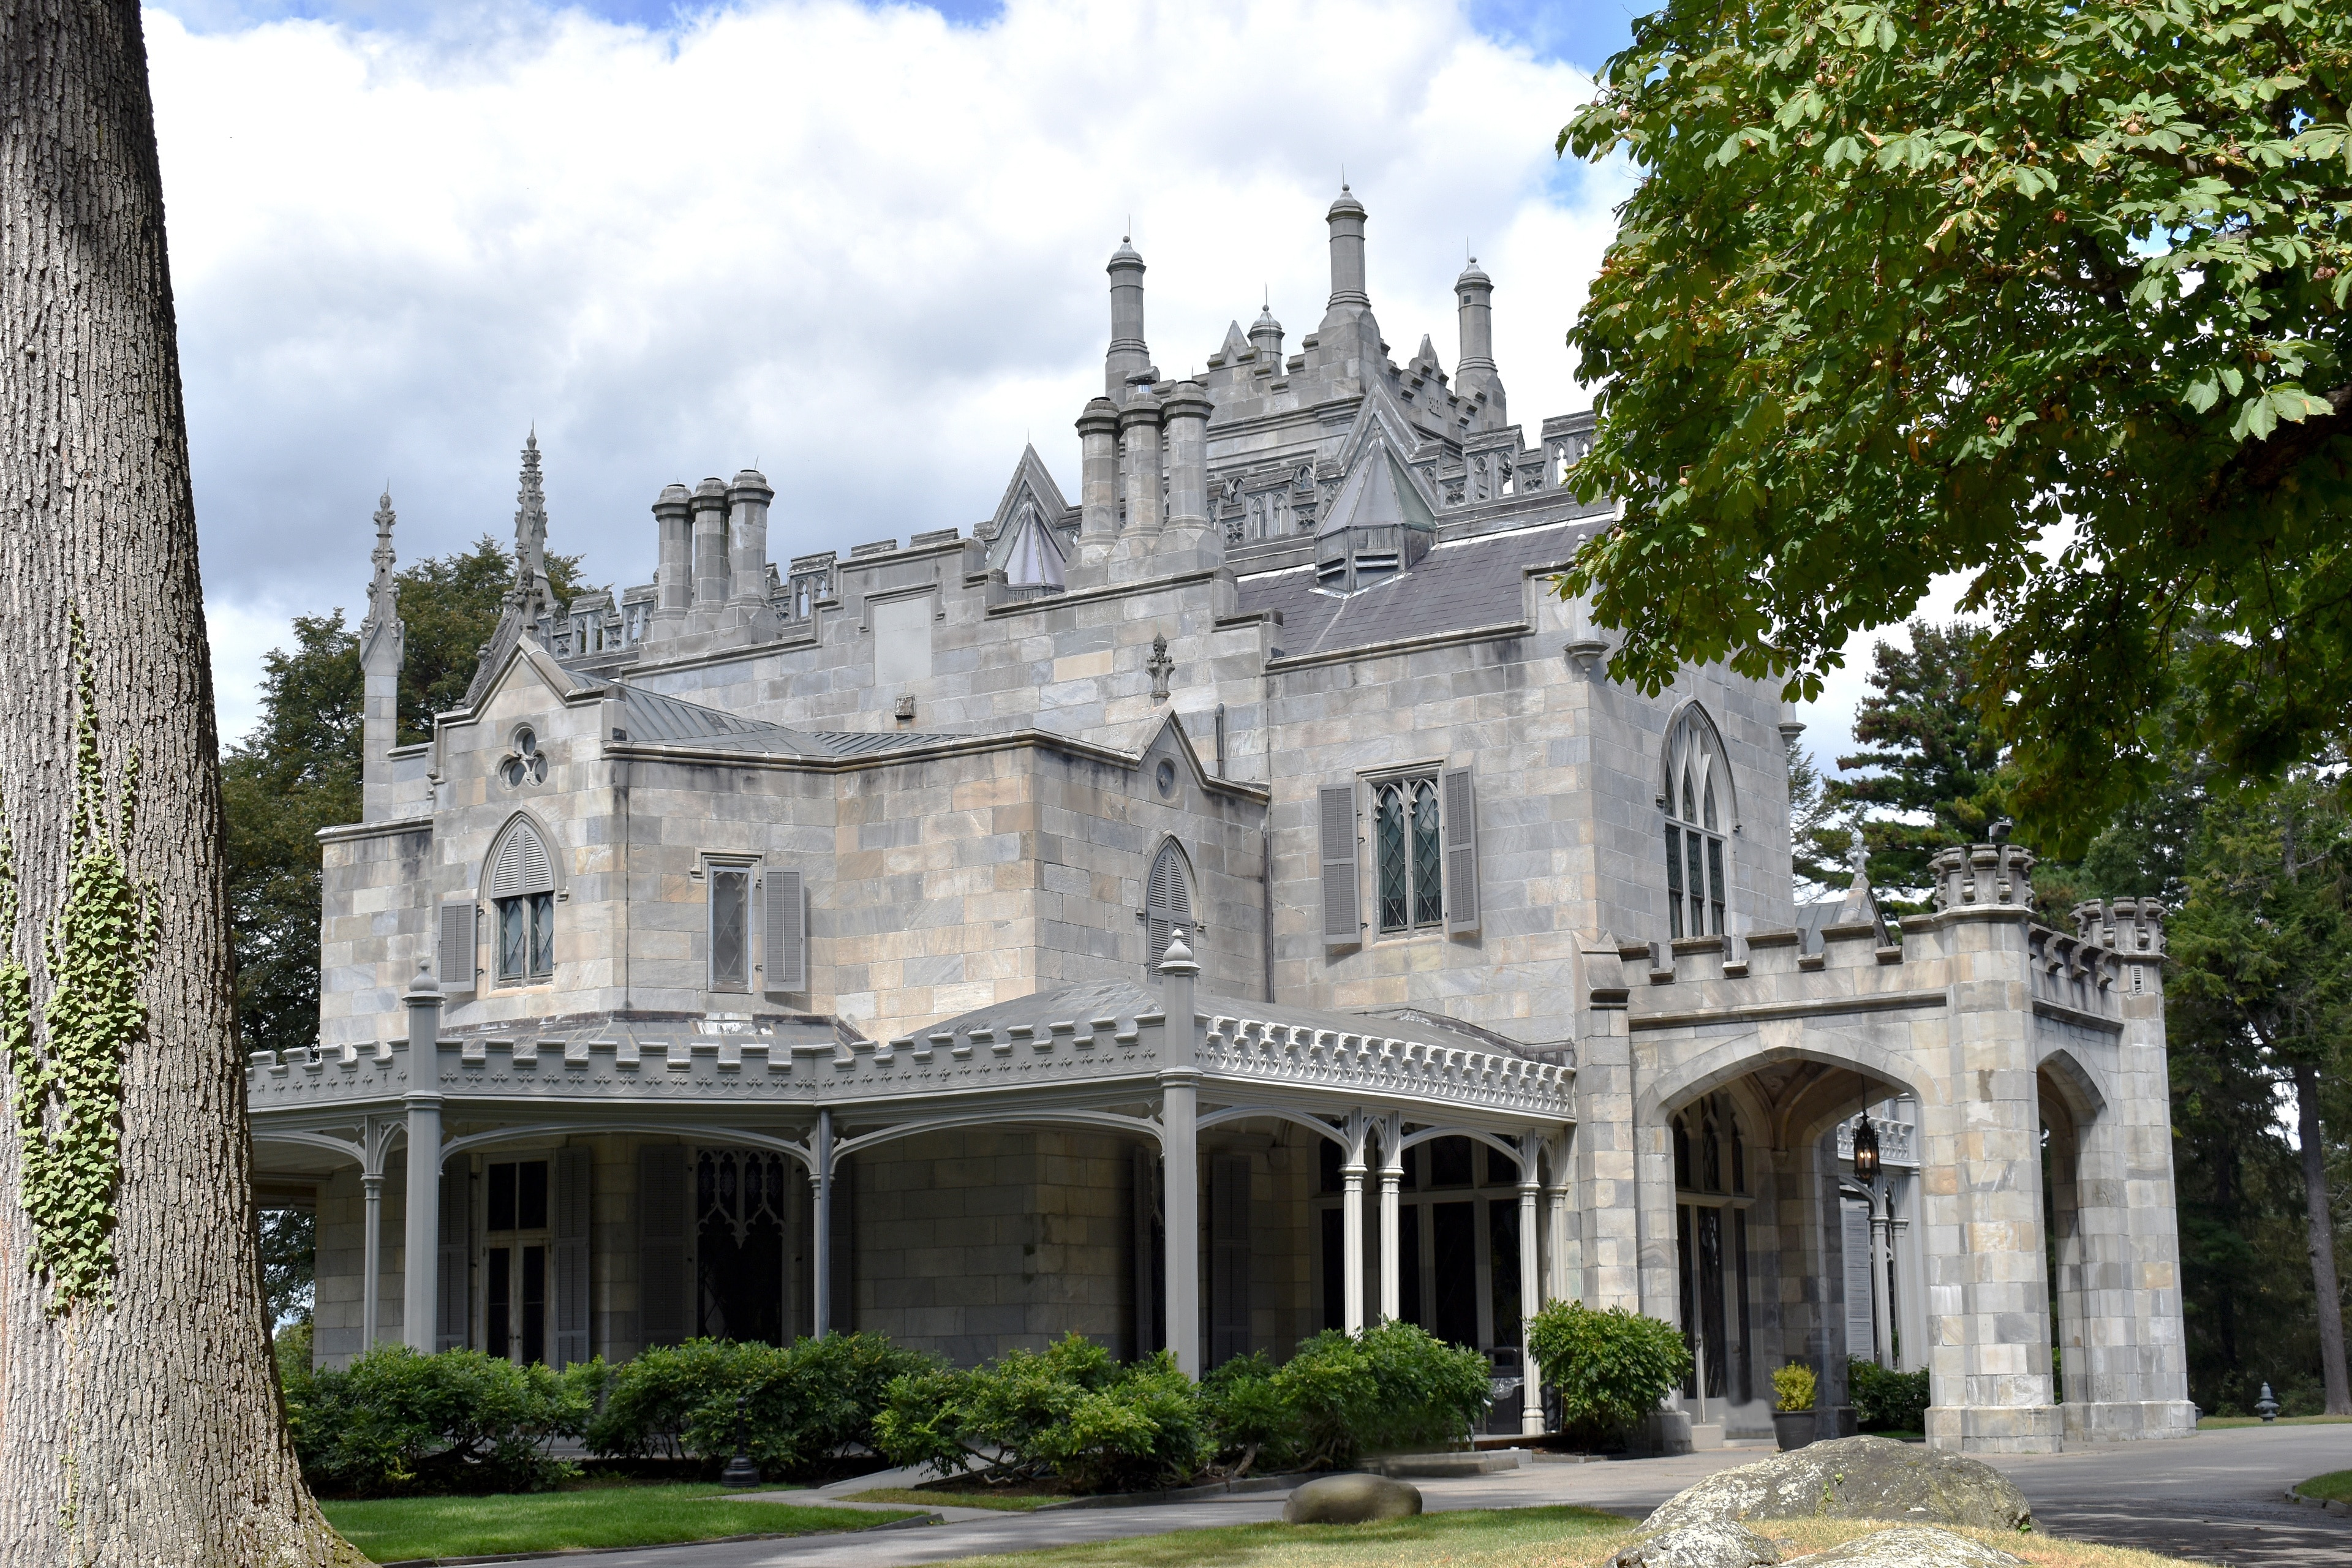 This mansion was built in 1838 and is situated on 65 acres on the Hudson river and was home to New York City Major William Paulding Jr., merchant George Merritt and railroad tycoon Jay Gould consecutively.